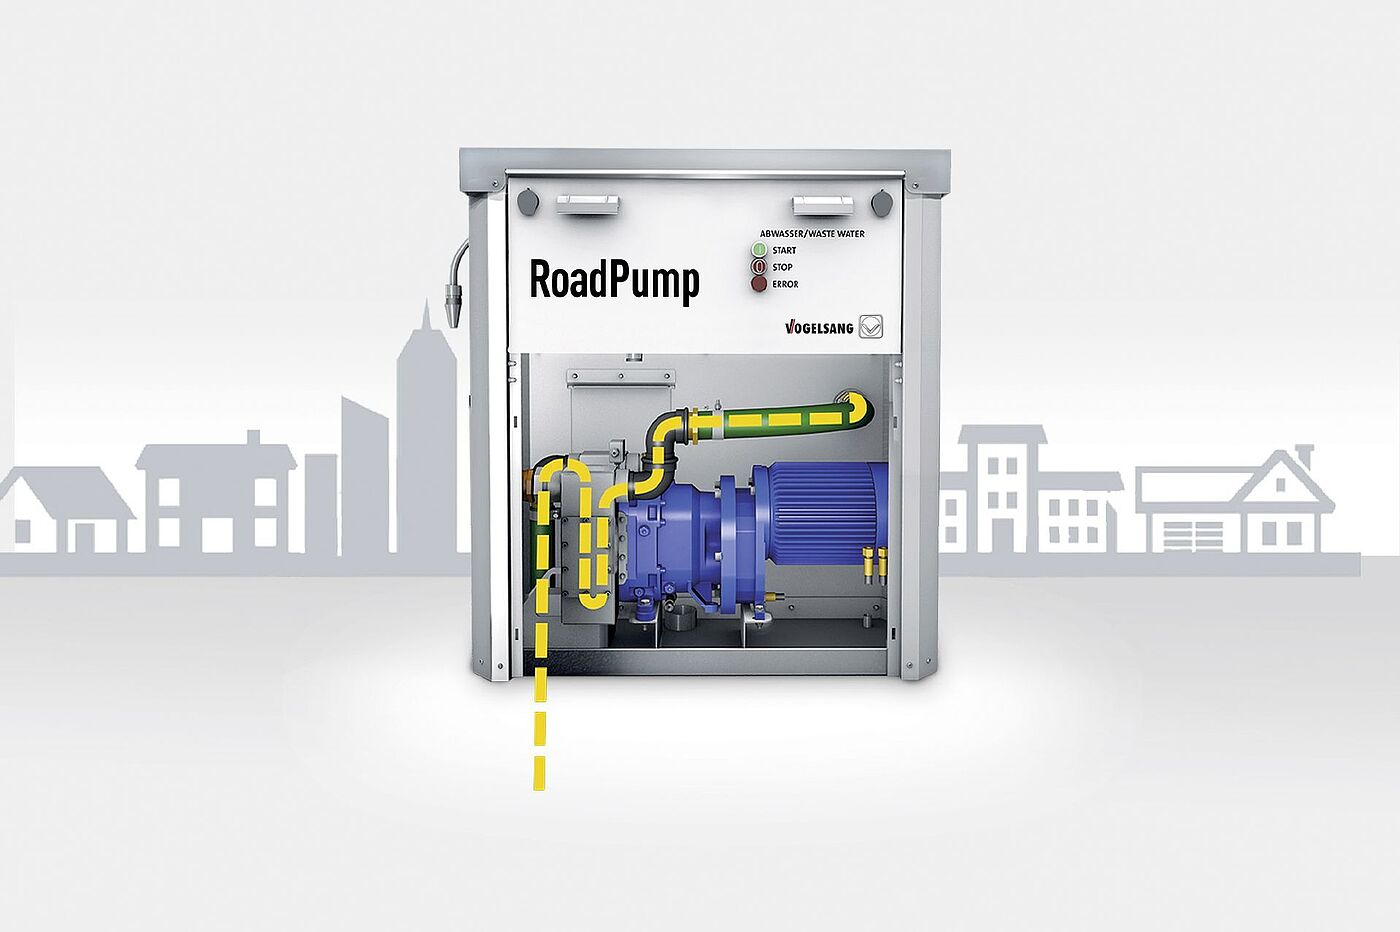 RoadPump by Vogelsang: The fresh water supply and wastewater disposal system for coaches